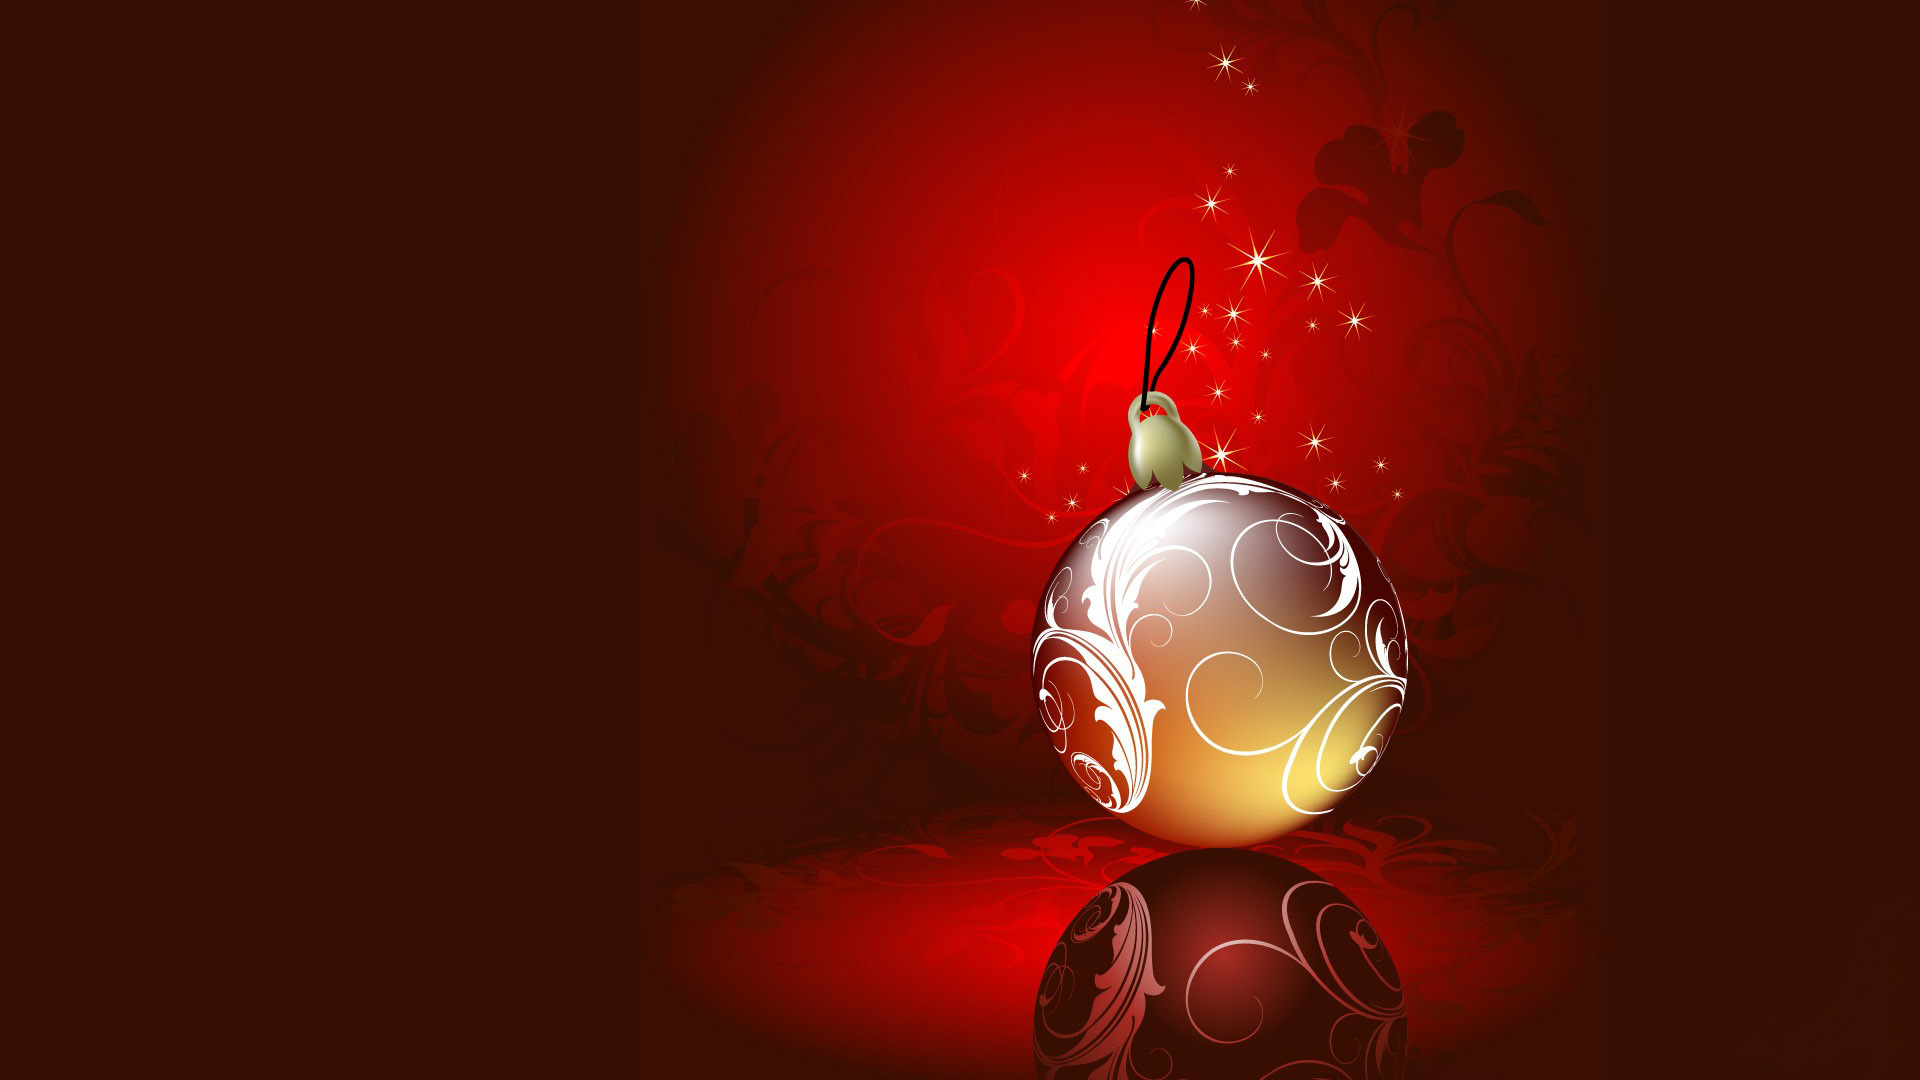 New Year Windows Background HD Wallpaper And Make